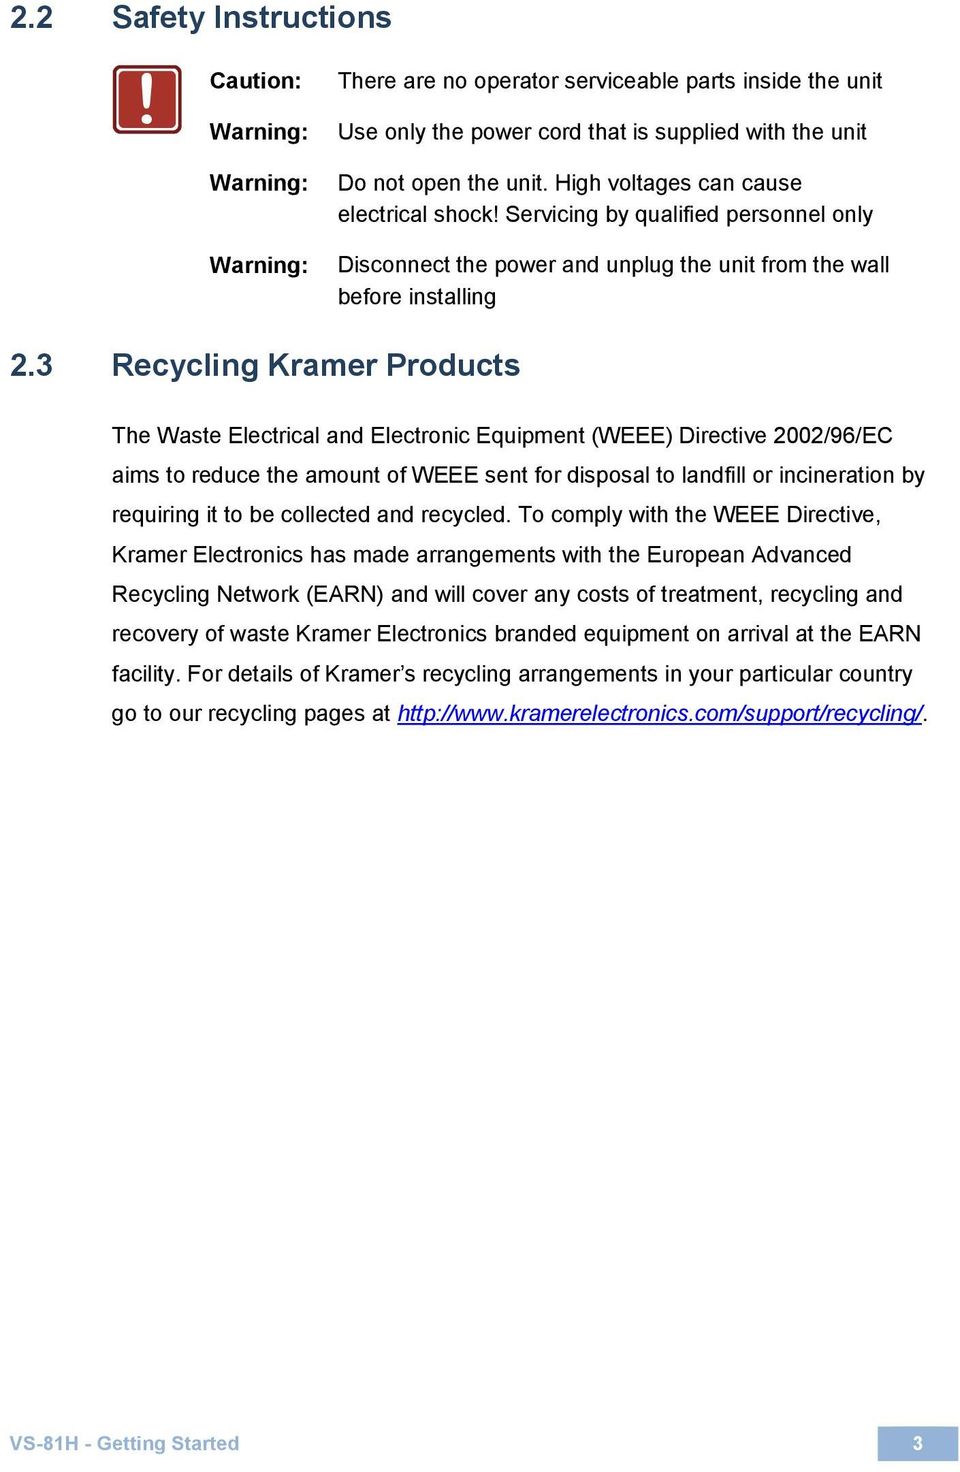 3 Recycling Kramer Products The Waste Electrical and Electronic Equipment (WEEE) Directive 2002/96/EC aims to reduce the amount of WEEE sent for disposal to landfill or incineration by requiring it